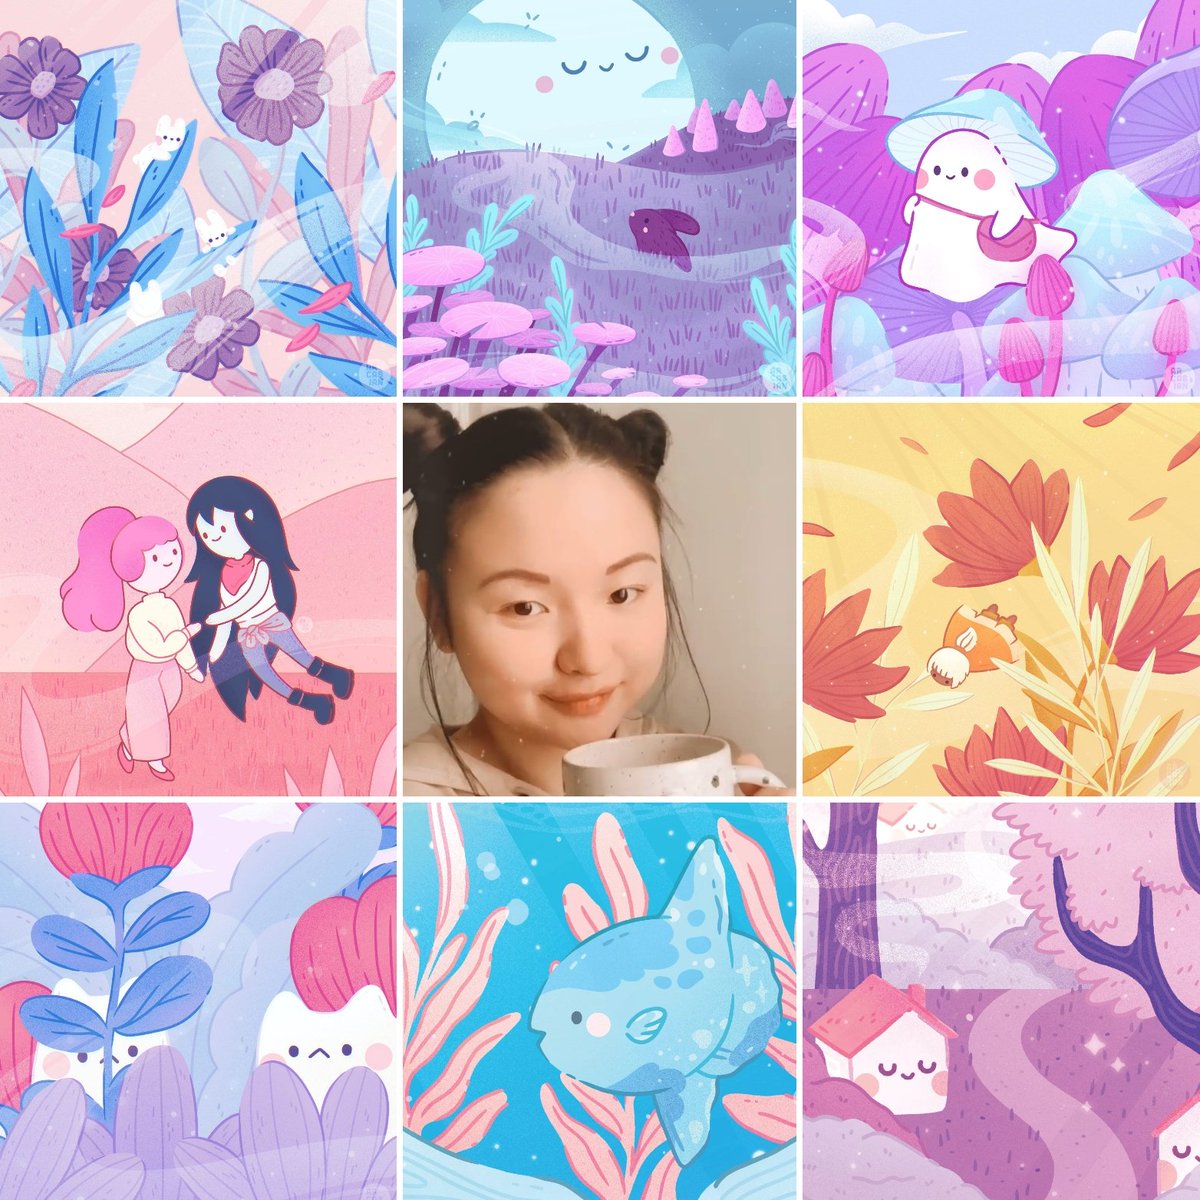 Oh hello again #artvsartist2020 ✌️ Here are some of my favs from the second half of the year! 